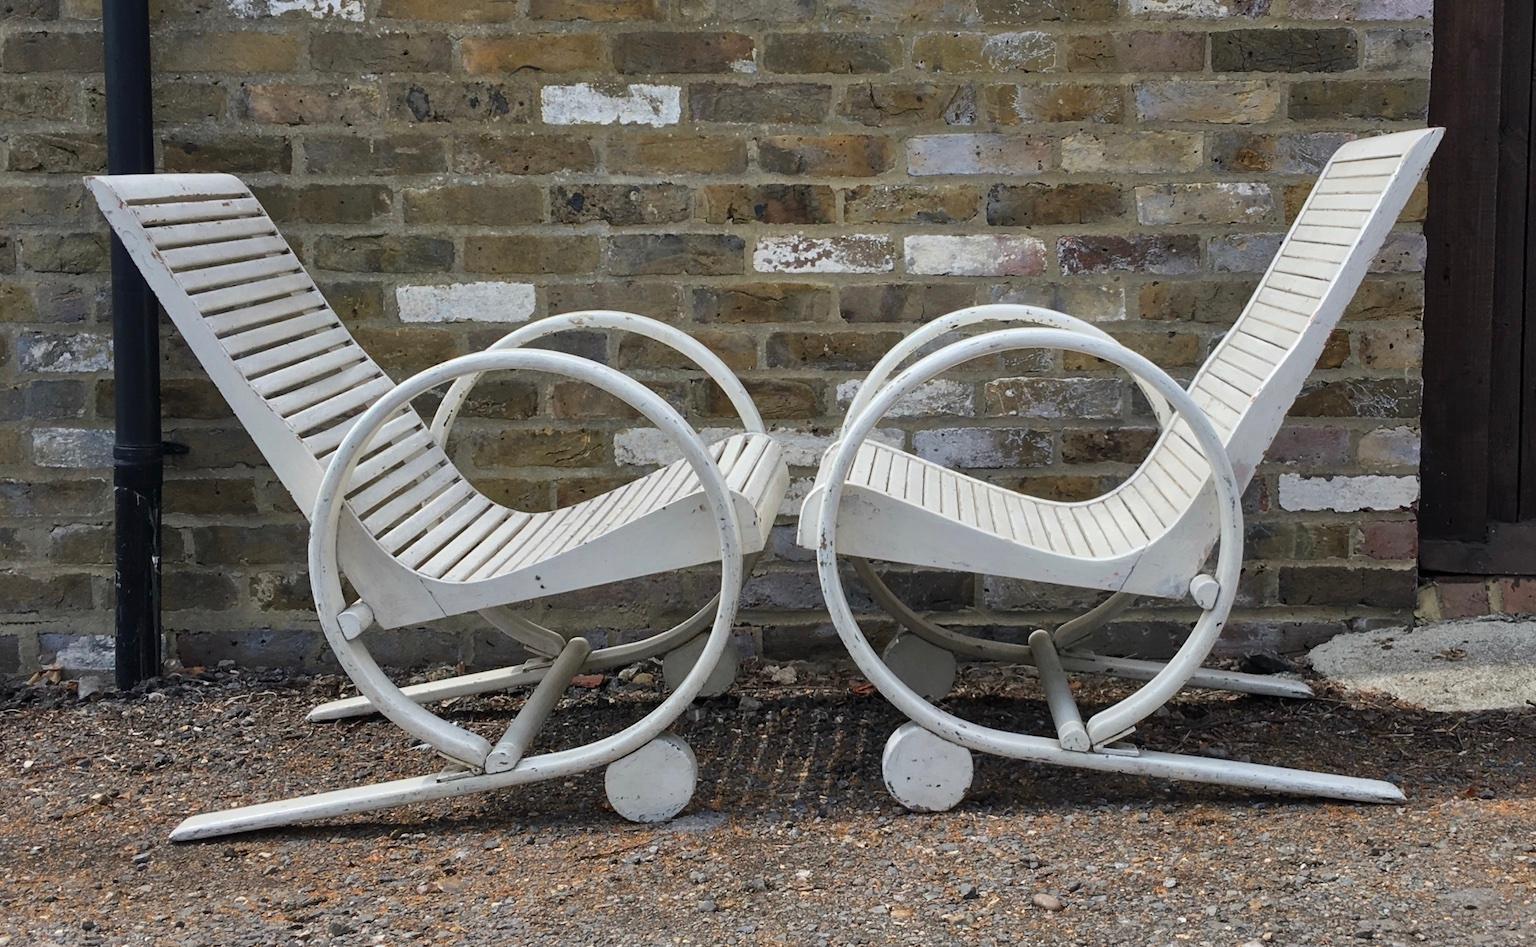 Pair of truly stunning American Art Deco garden lounge chairs, 1930
A truly unique and rare pair of chairs, with carefully crafted bentwood spring style circular armrests. Hardwood slat seat and backrest add to the charm of these impressive